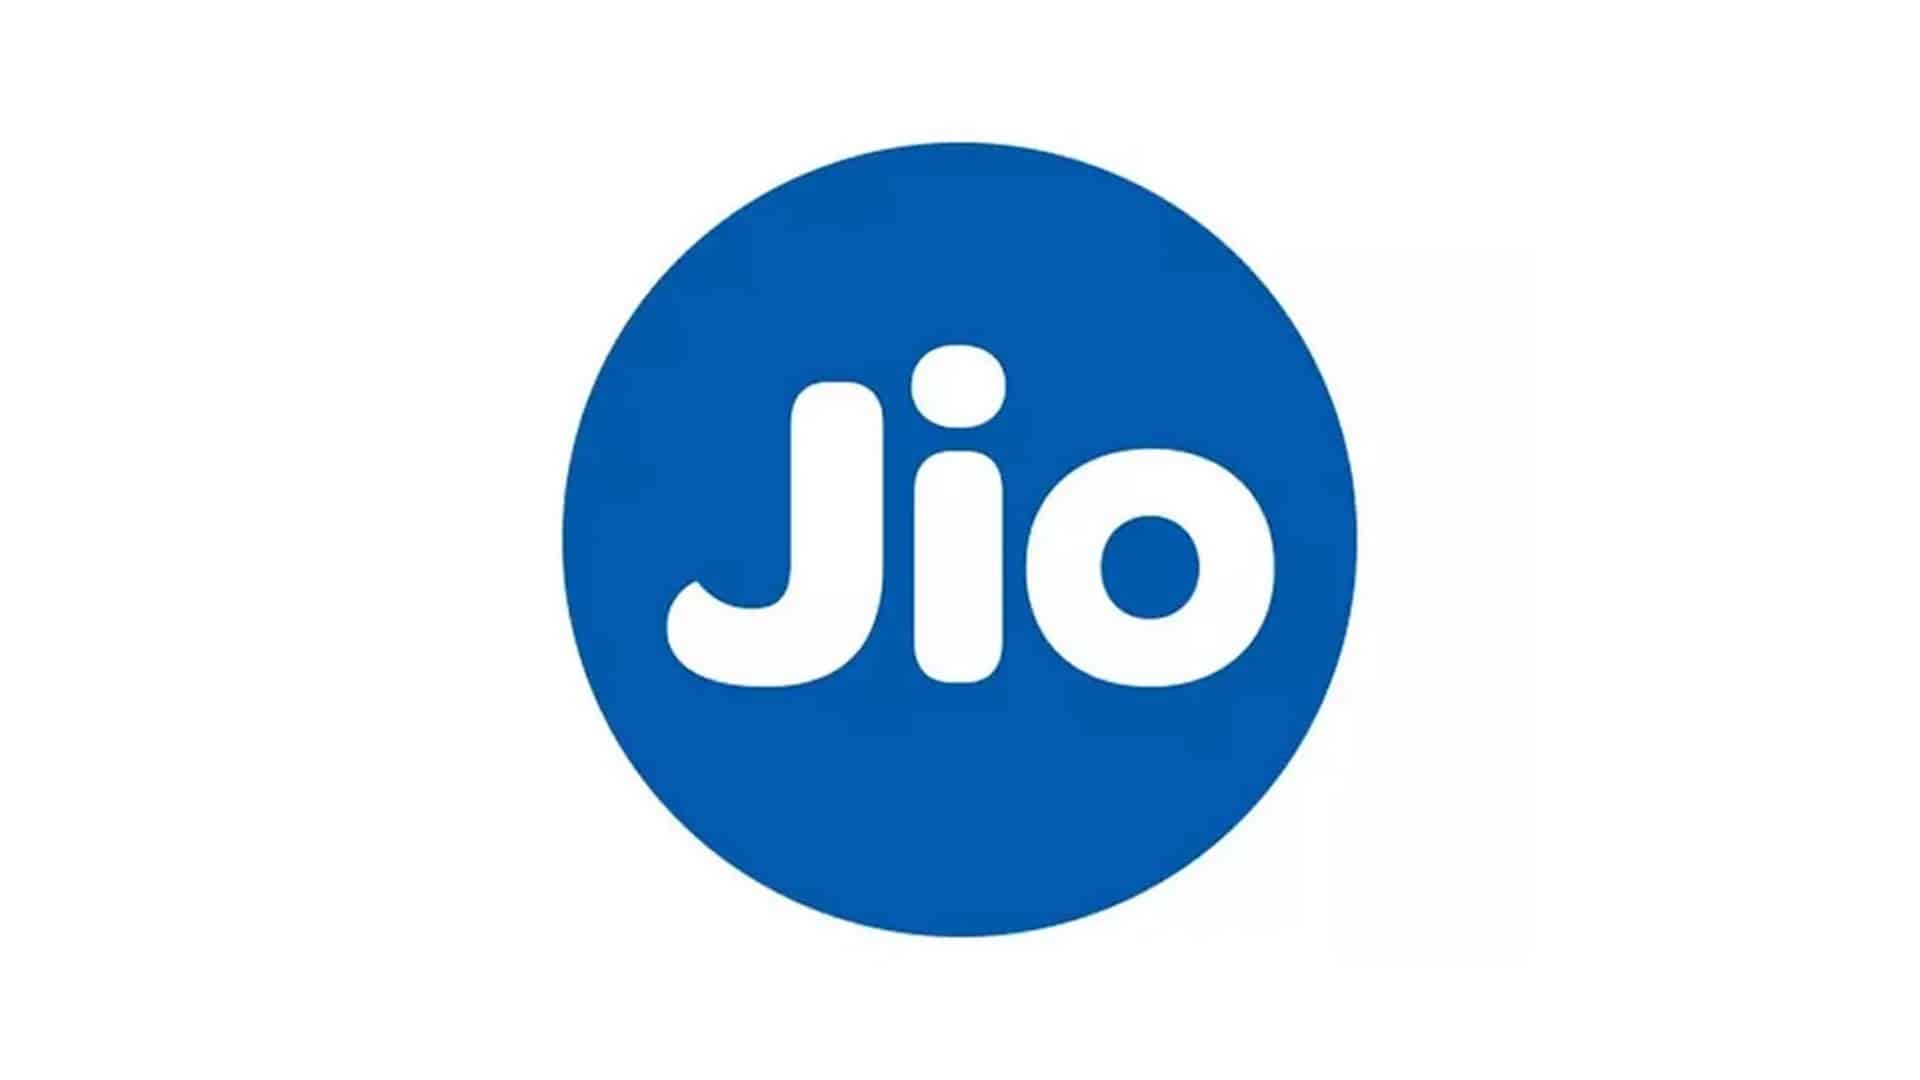 Jio Platforms to buy 17% stake in Glance for USD 200 mln